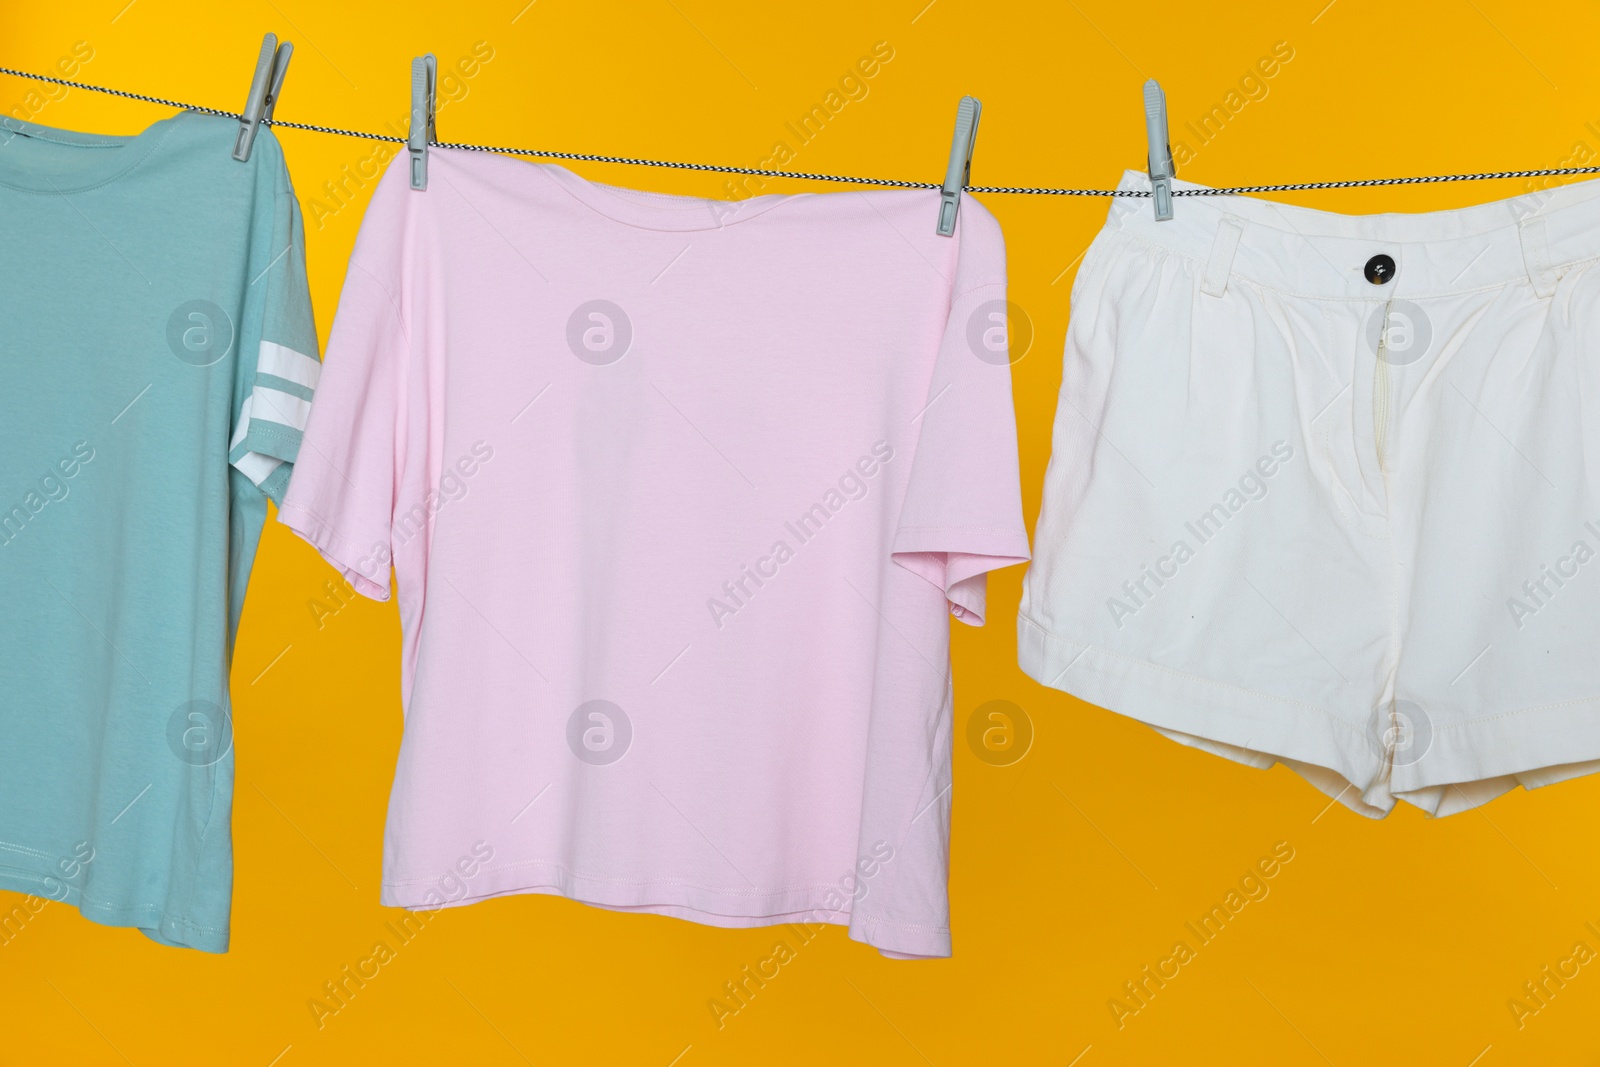 Photo of Different clothes drying on laundry line against orange background